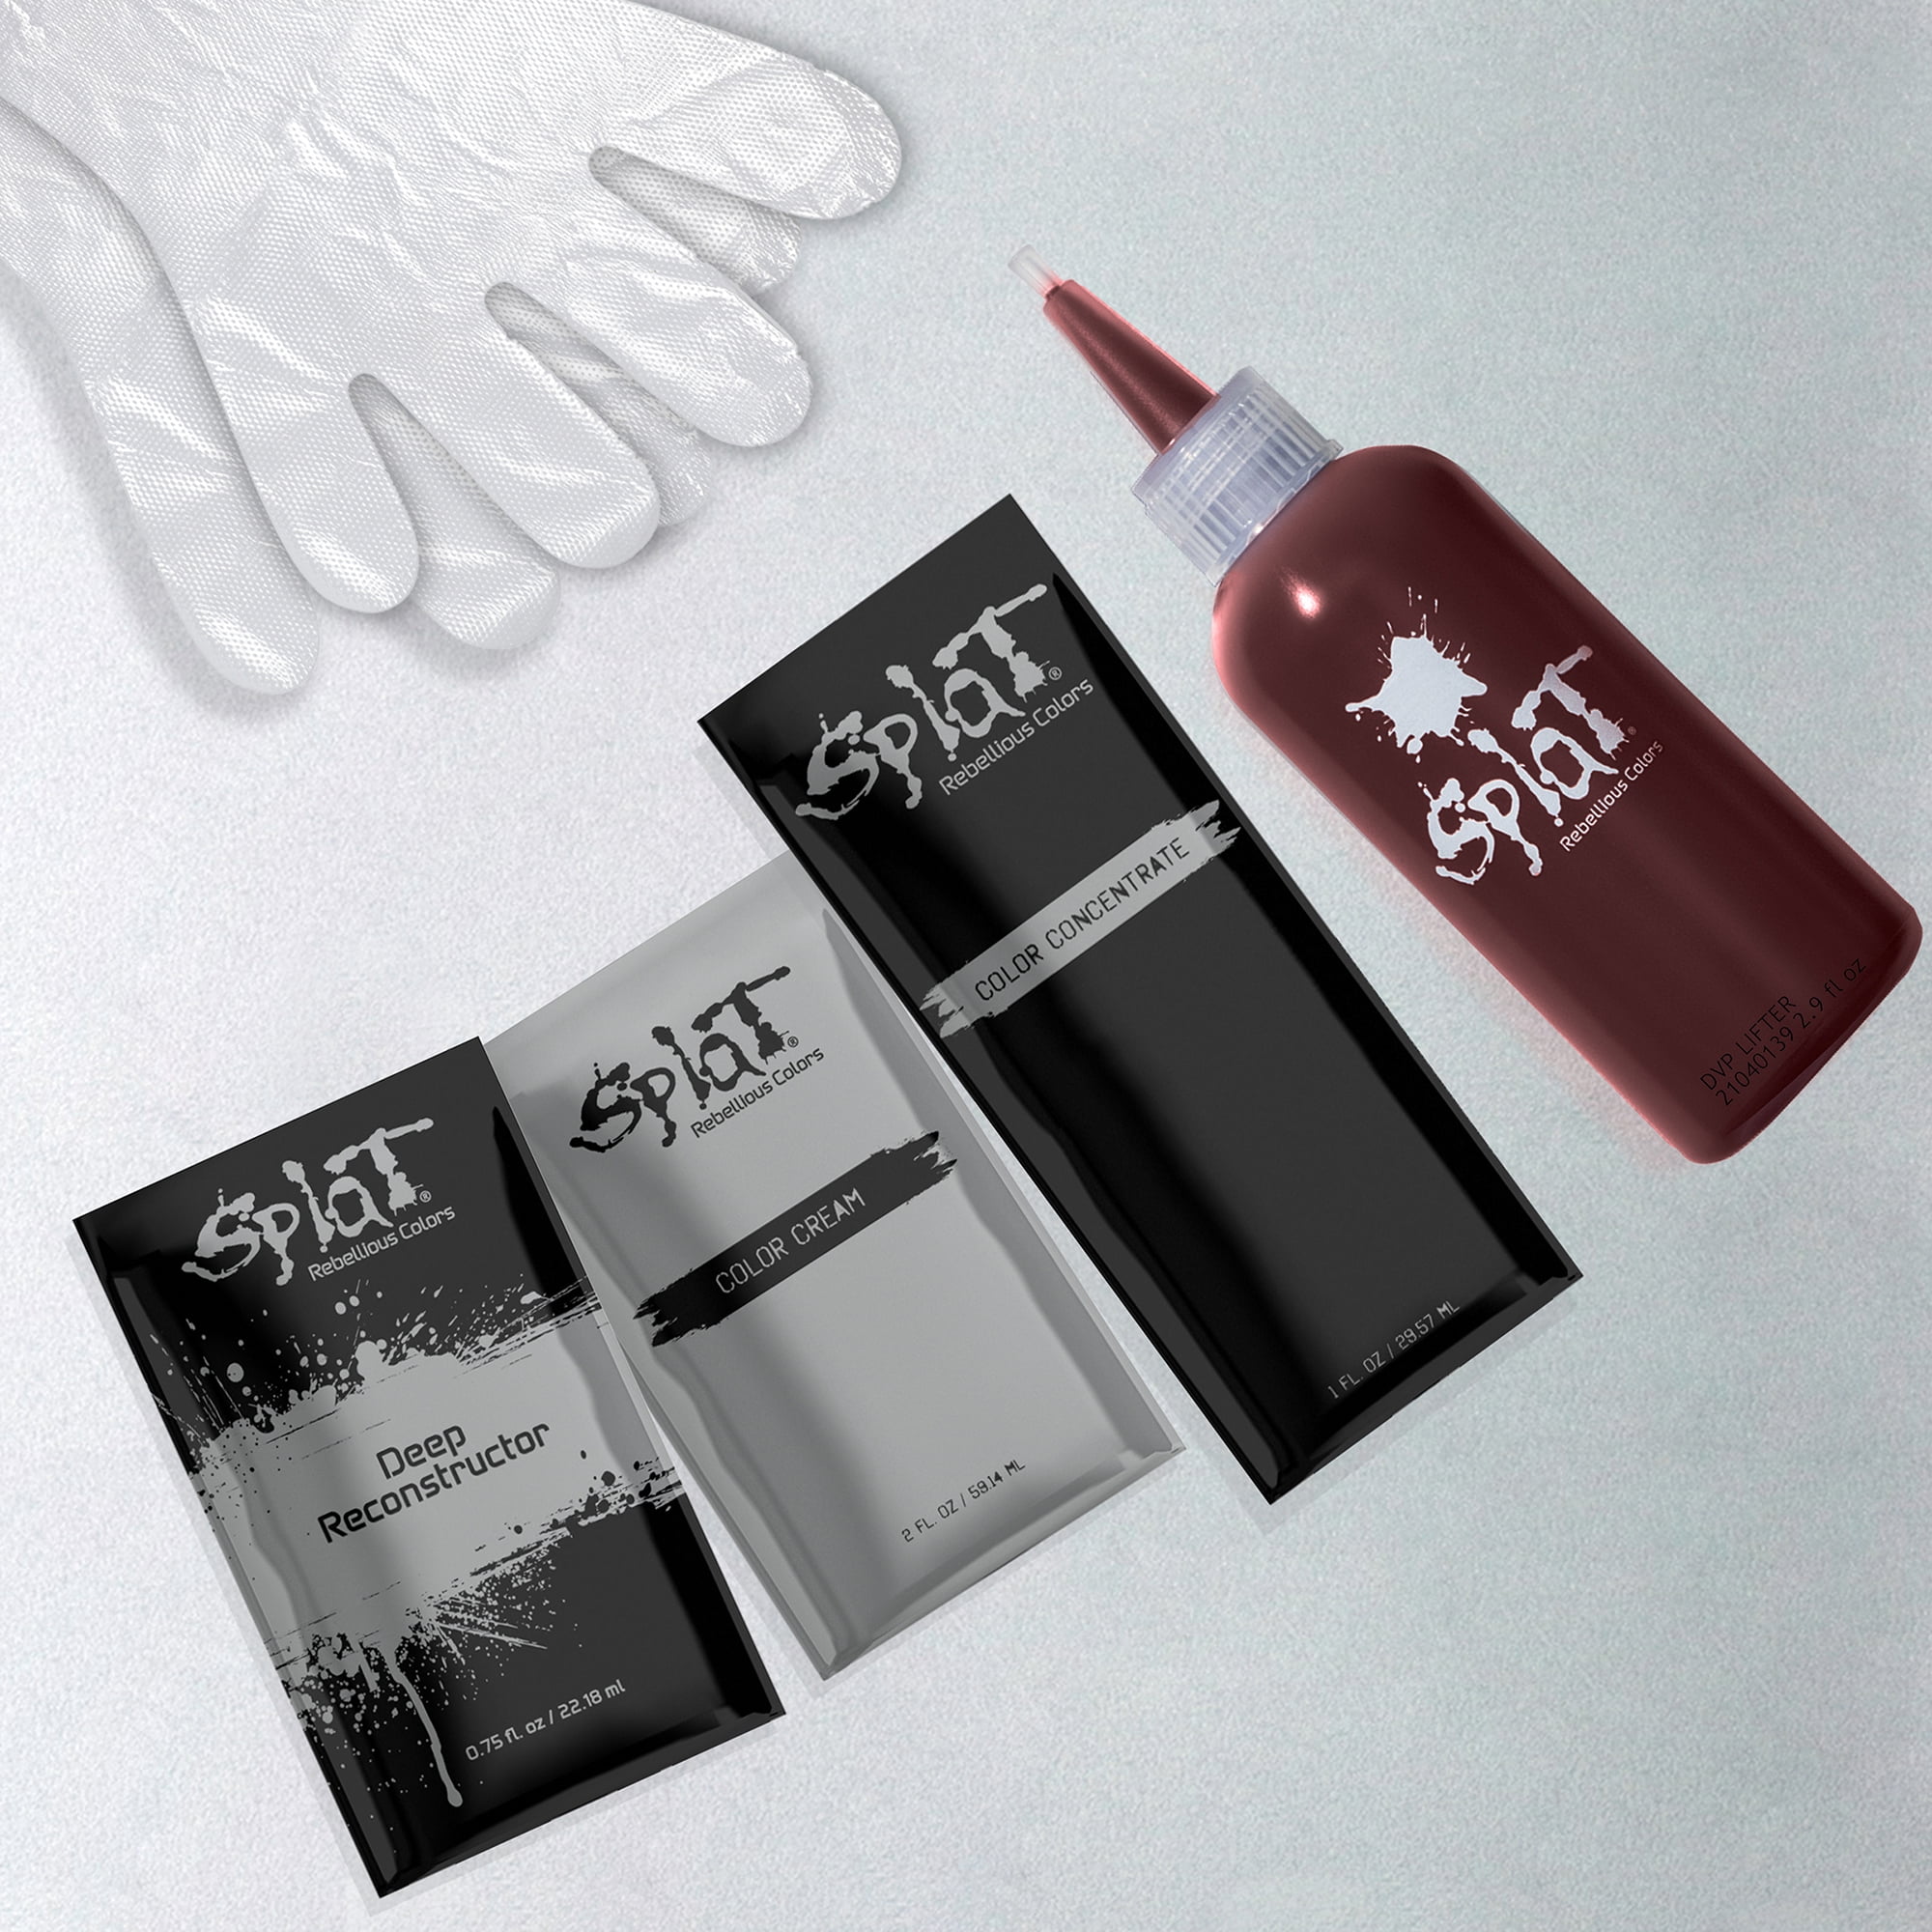 3x Splat Color Remover for Direct Dye and Fantasy Colors for sale online